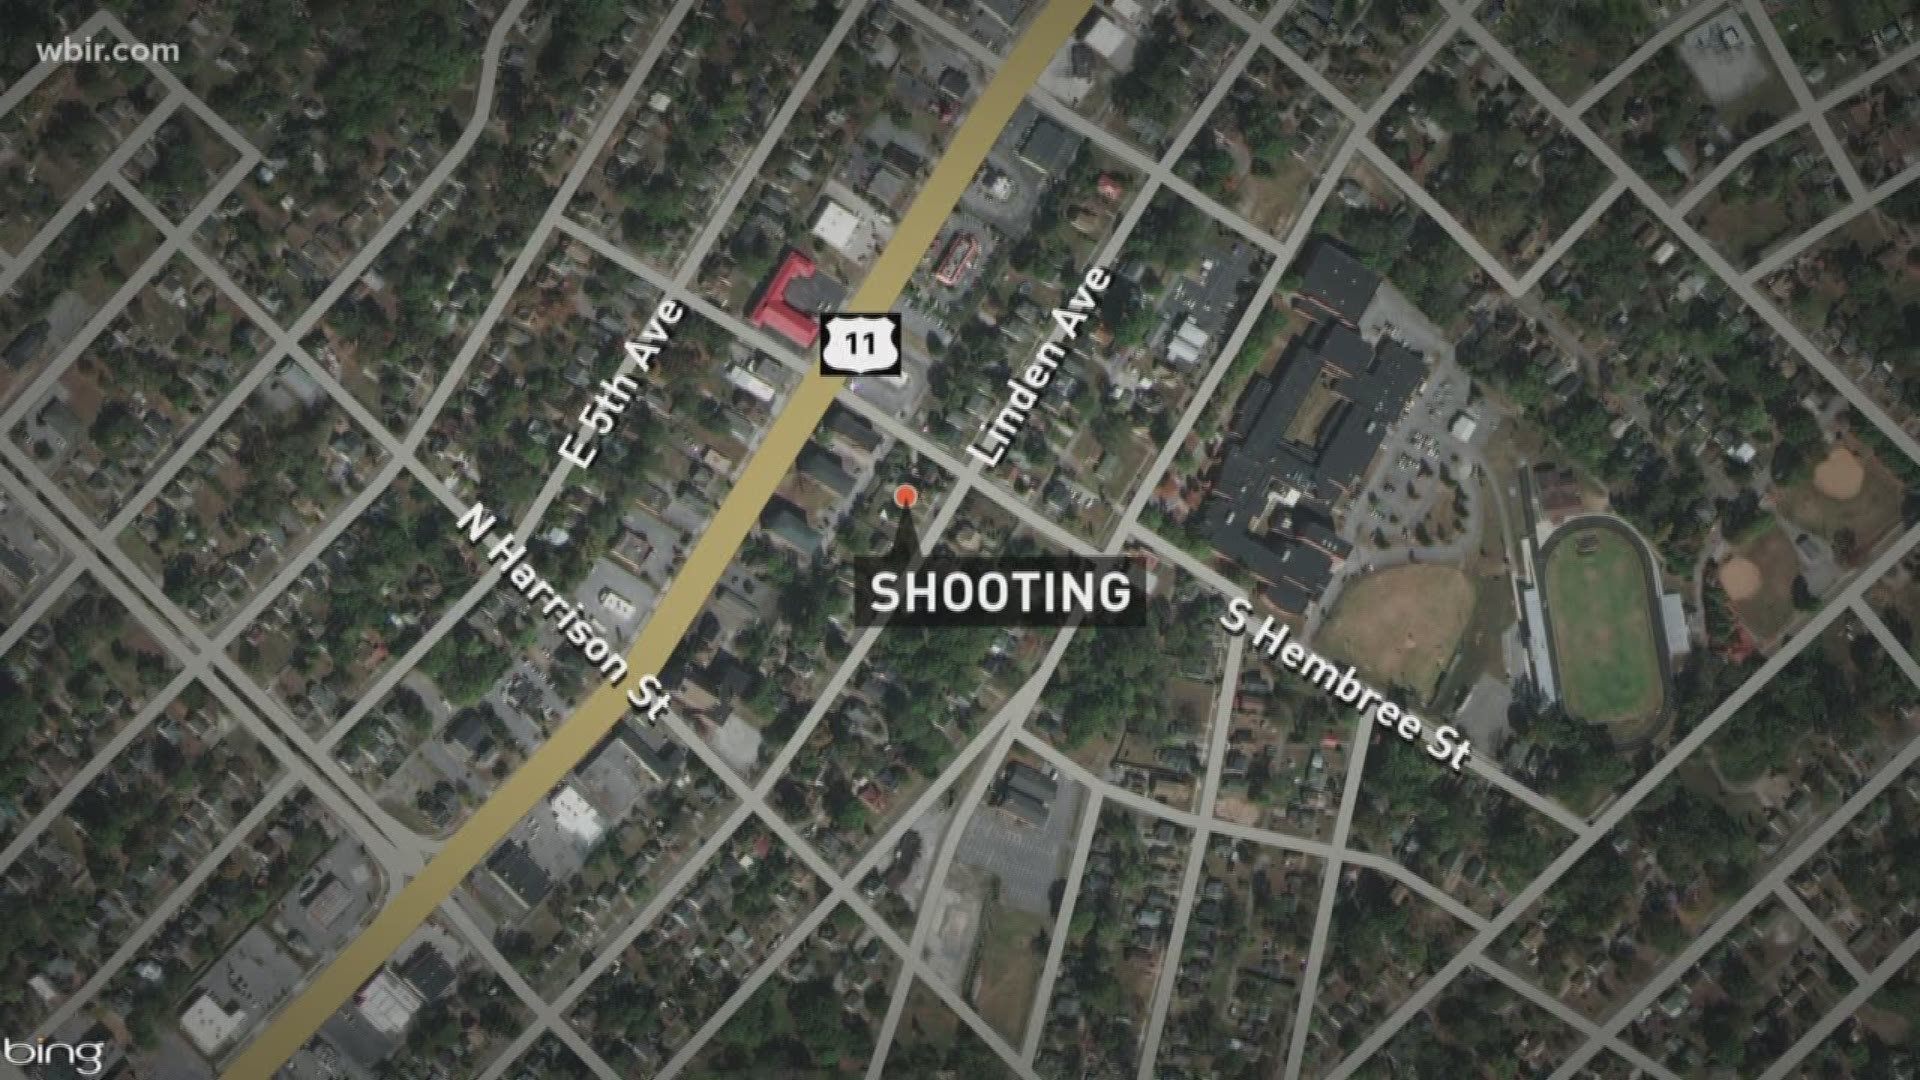 Knoxville police are investigating a shooting that happened Monday night in East Knoxville.